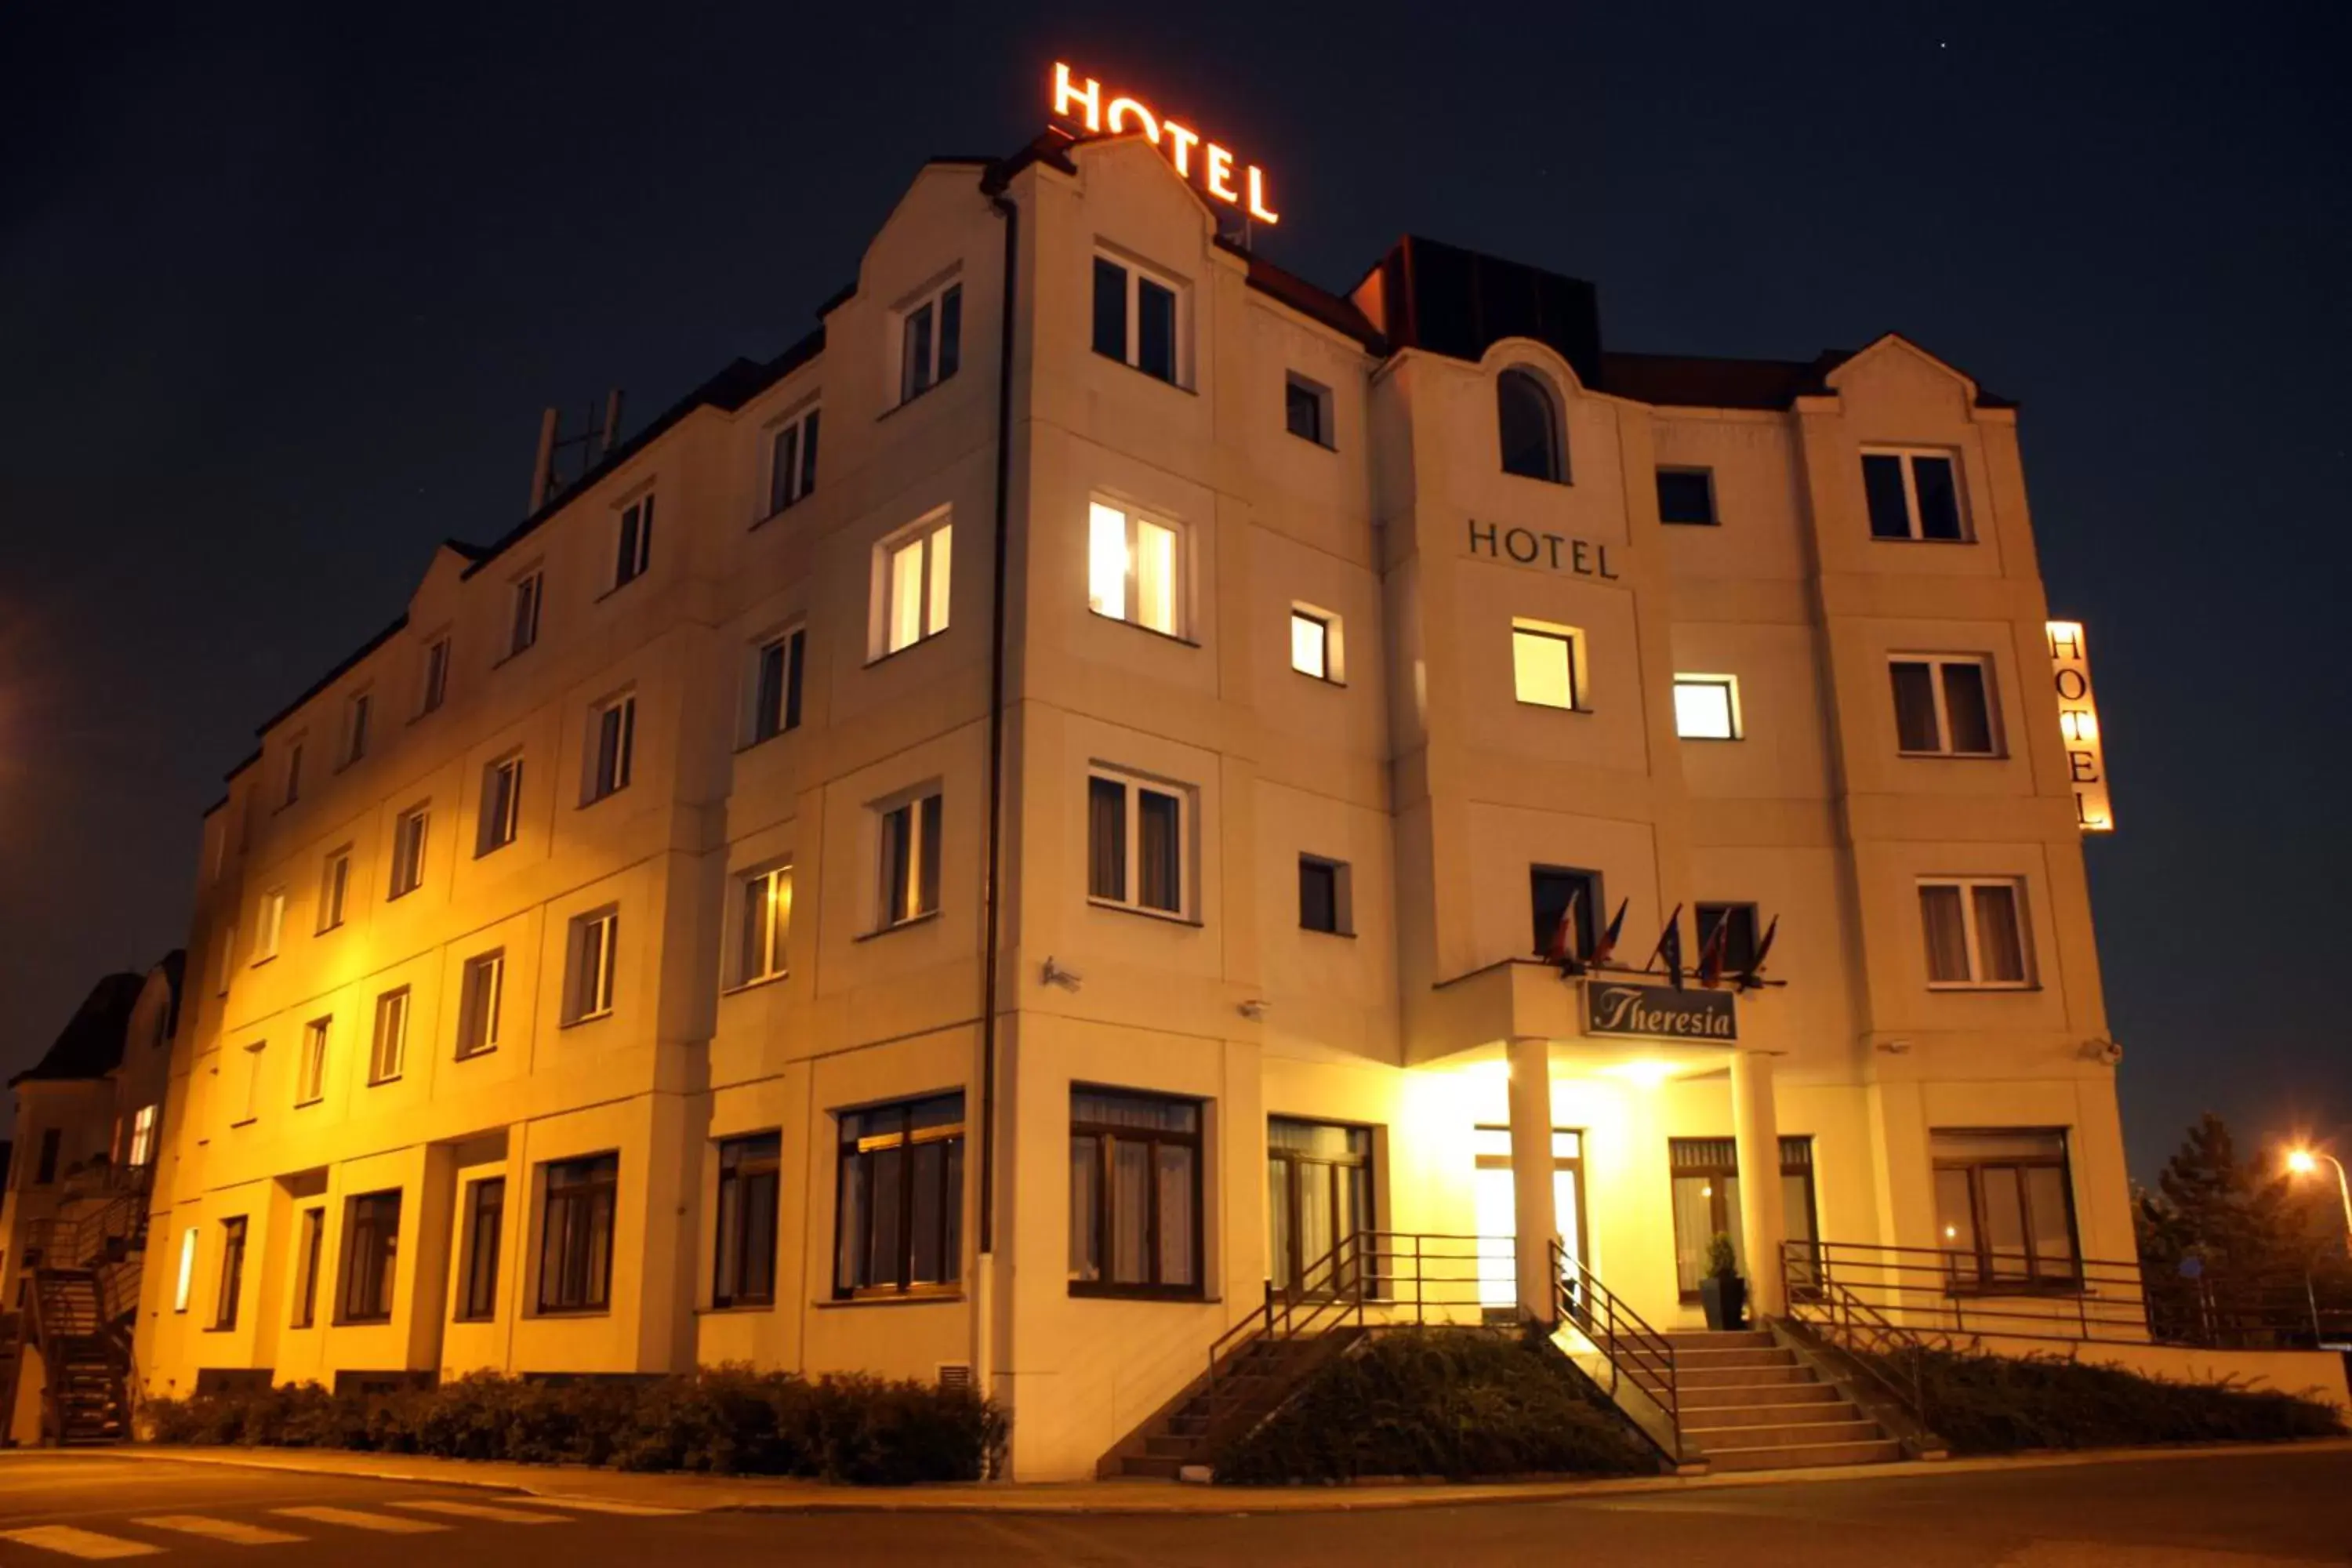 Property building in Hotel Theresia